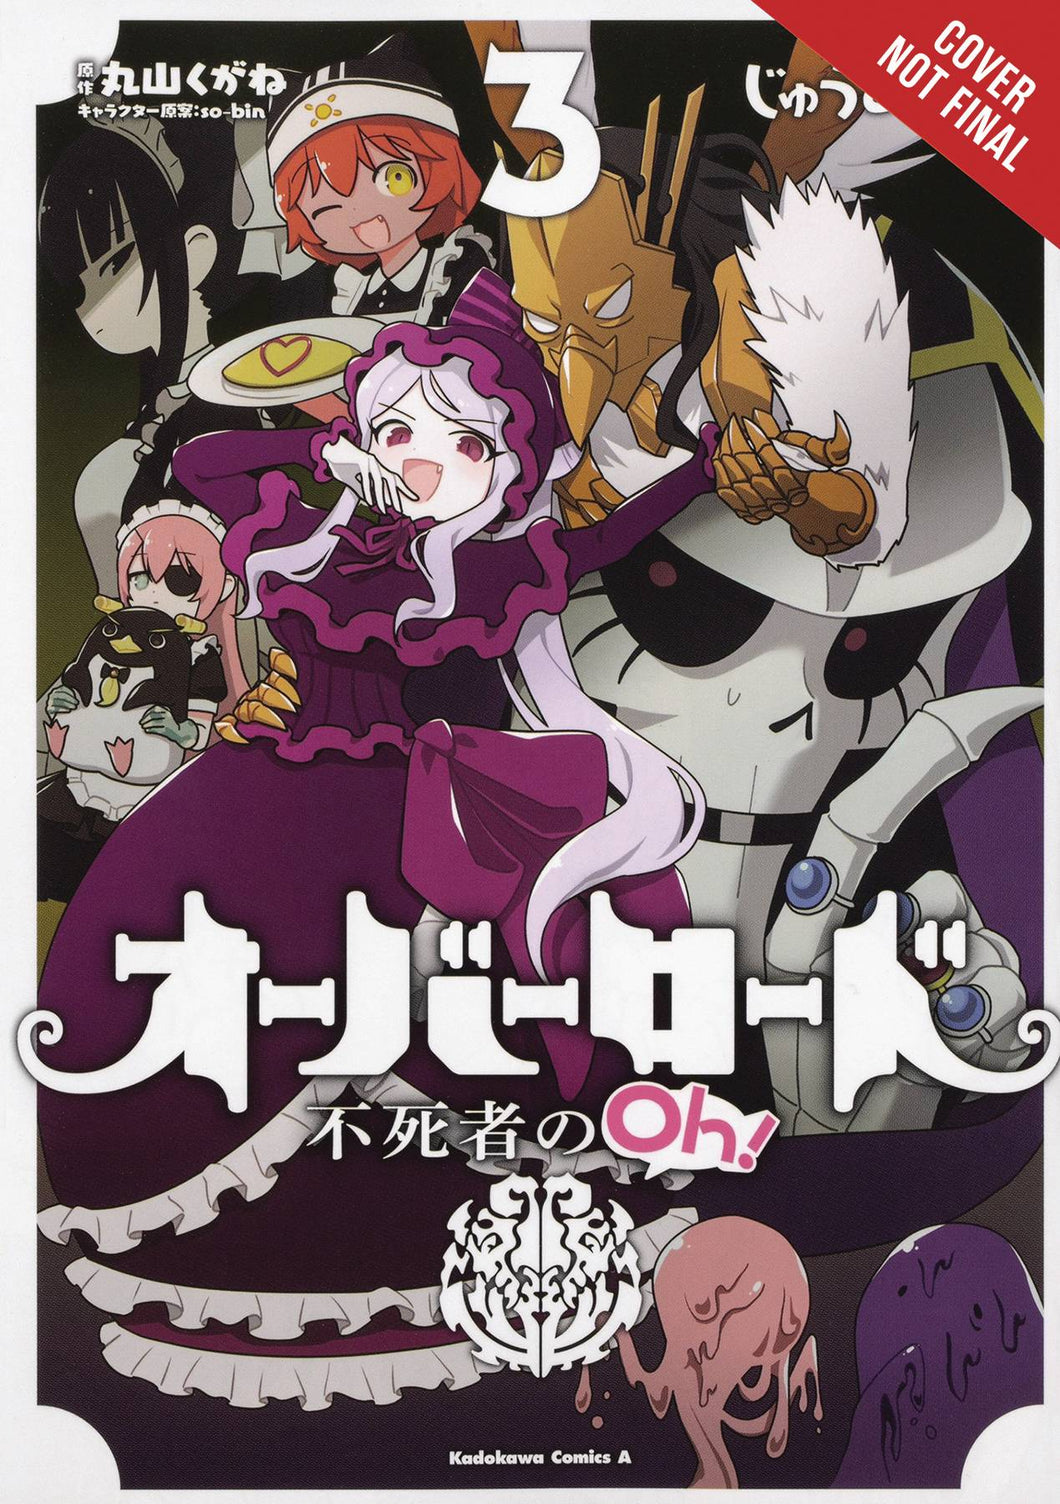 OVERLORD UNDEAD KING OH GN VOL 03 (C: 0-1-2)